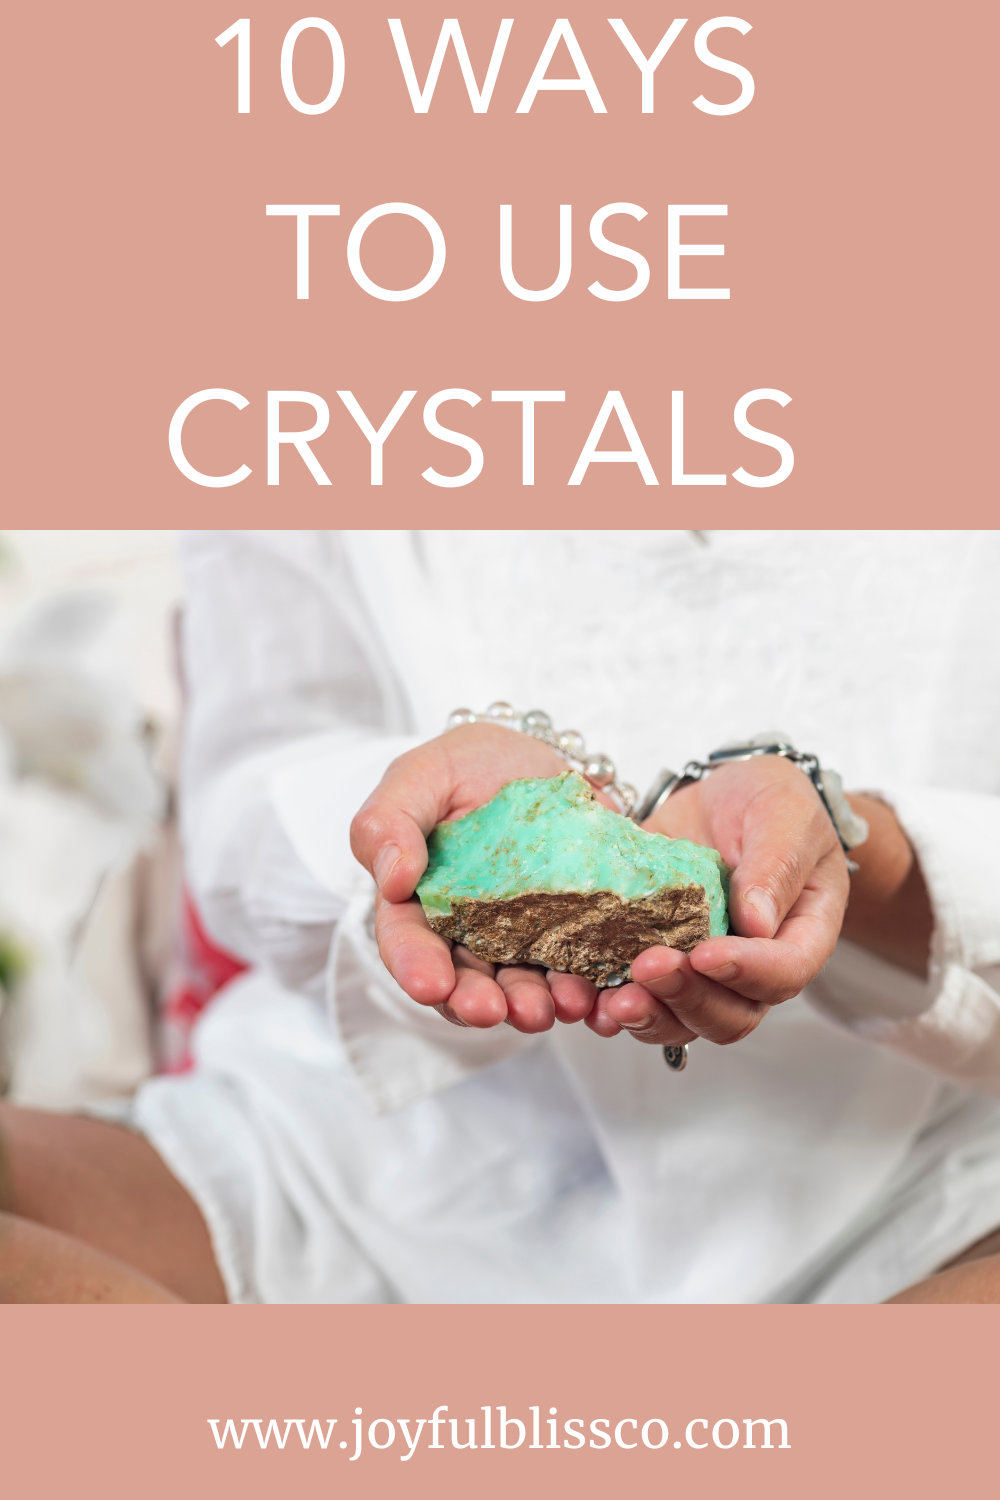 10 Ways To Use Crystals